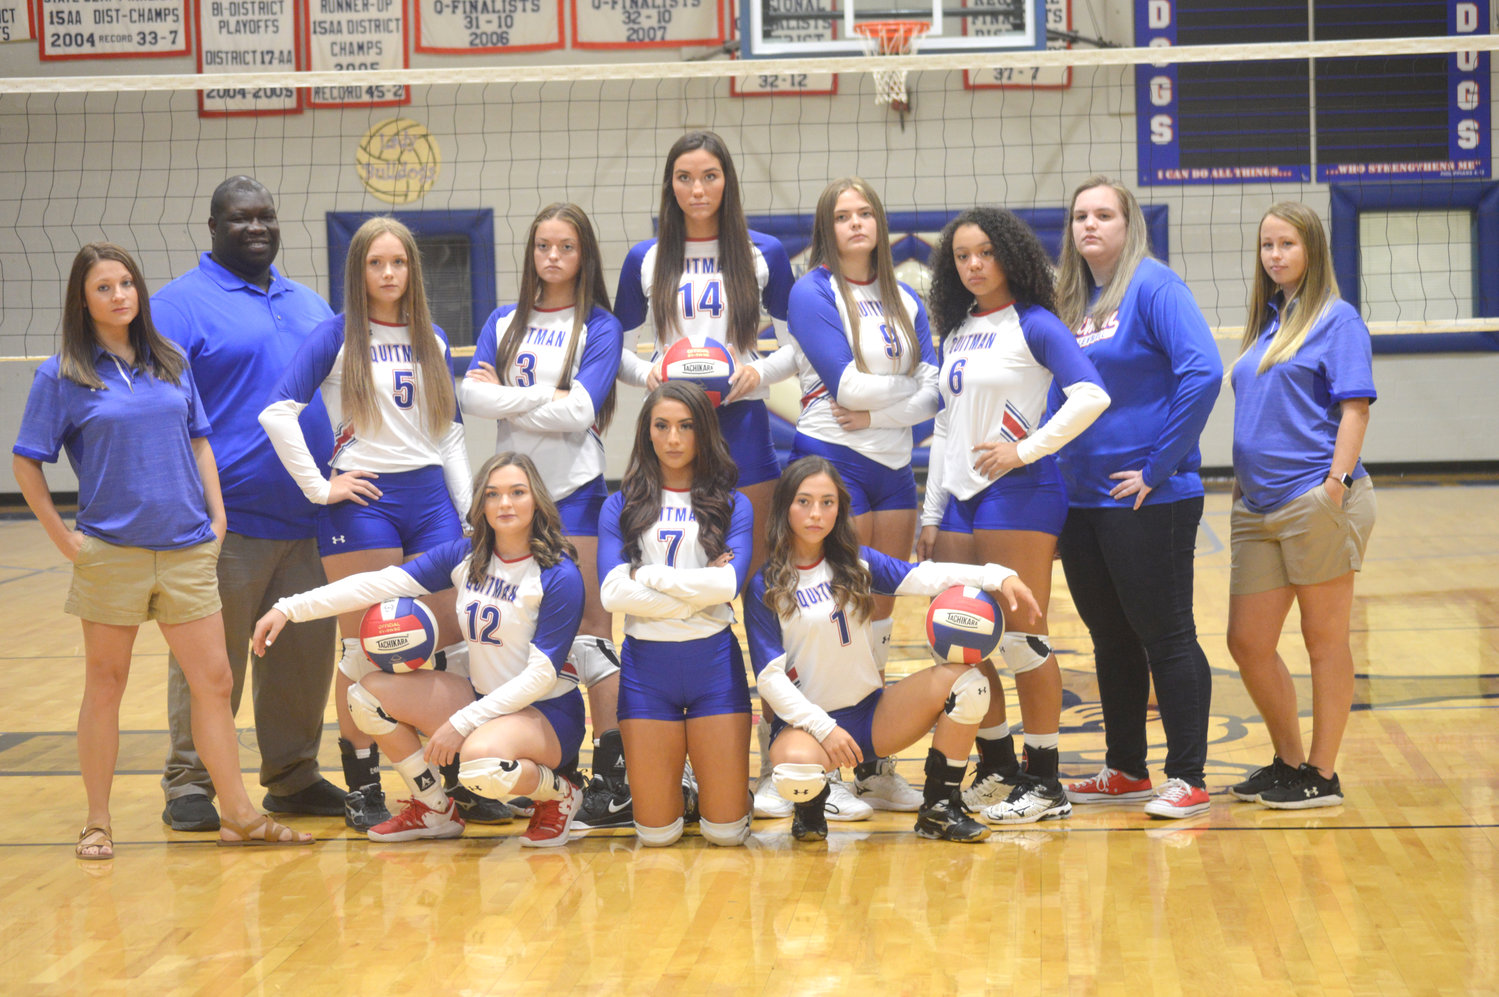 Quitman varsity volleyball roster 1-Addison Marcee, 3-Maddy Pence, 5-Carley Spears, 6-Ashley Davis, 7-Brooklyn Marcee, 9-Kaysi Parker, 14-Ava Burroughs, 12/22-Alexis O’Neal.